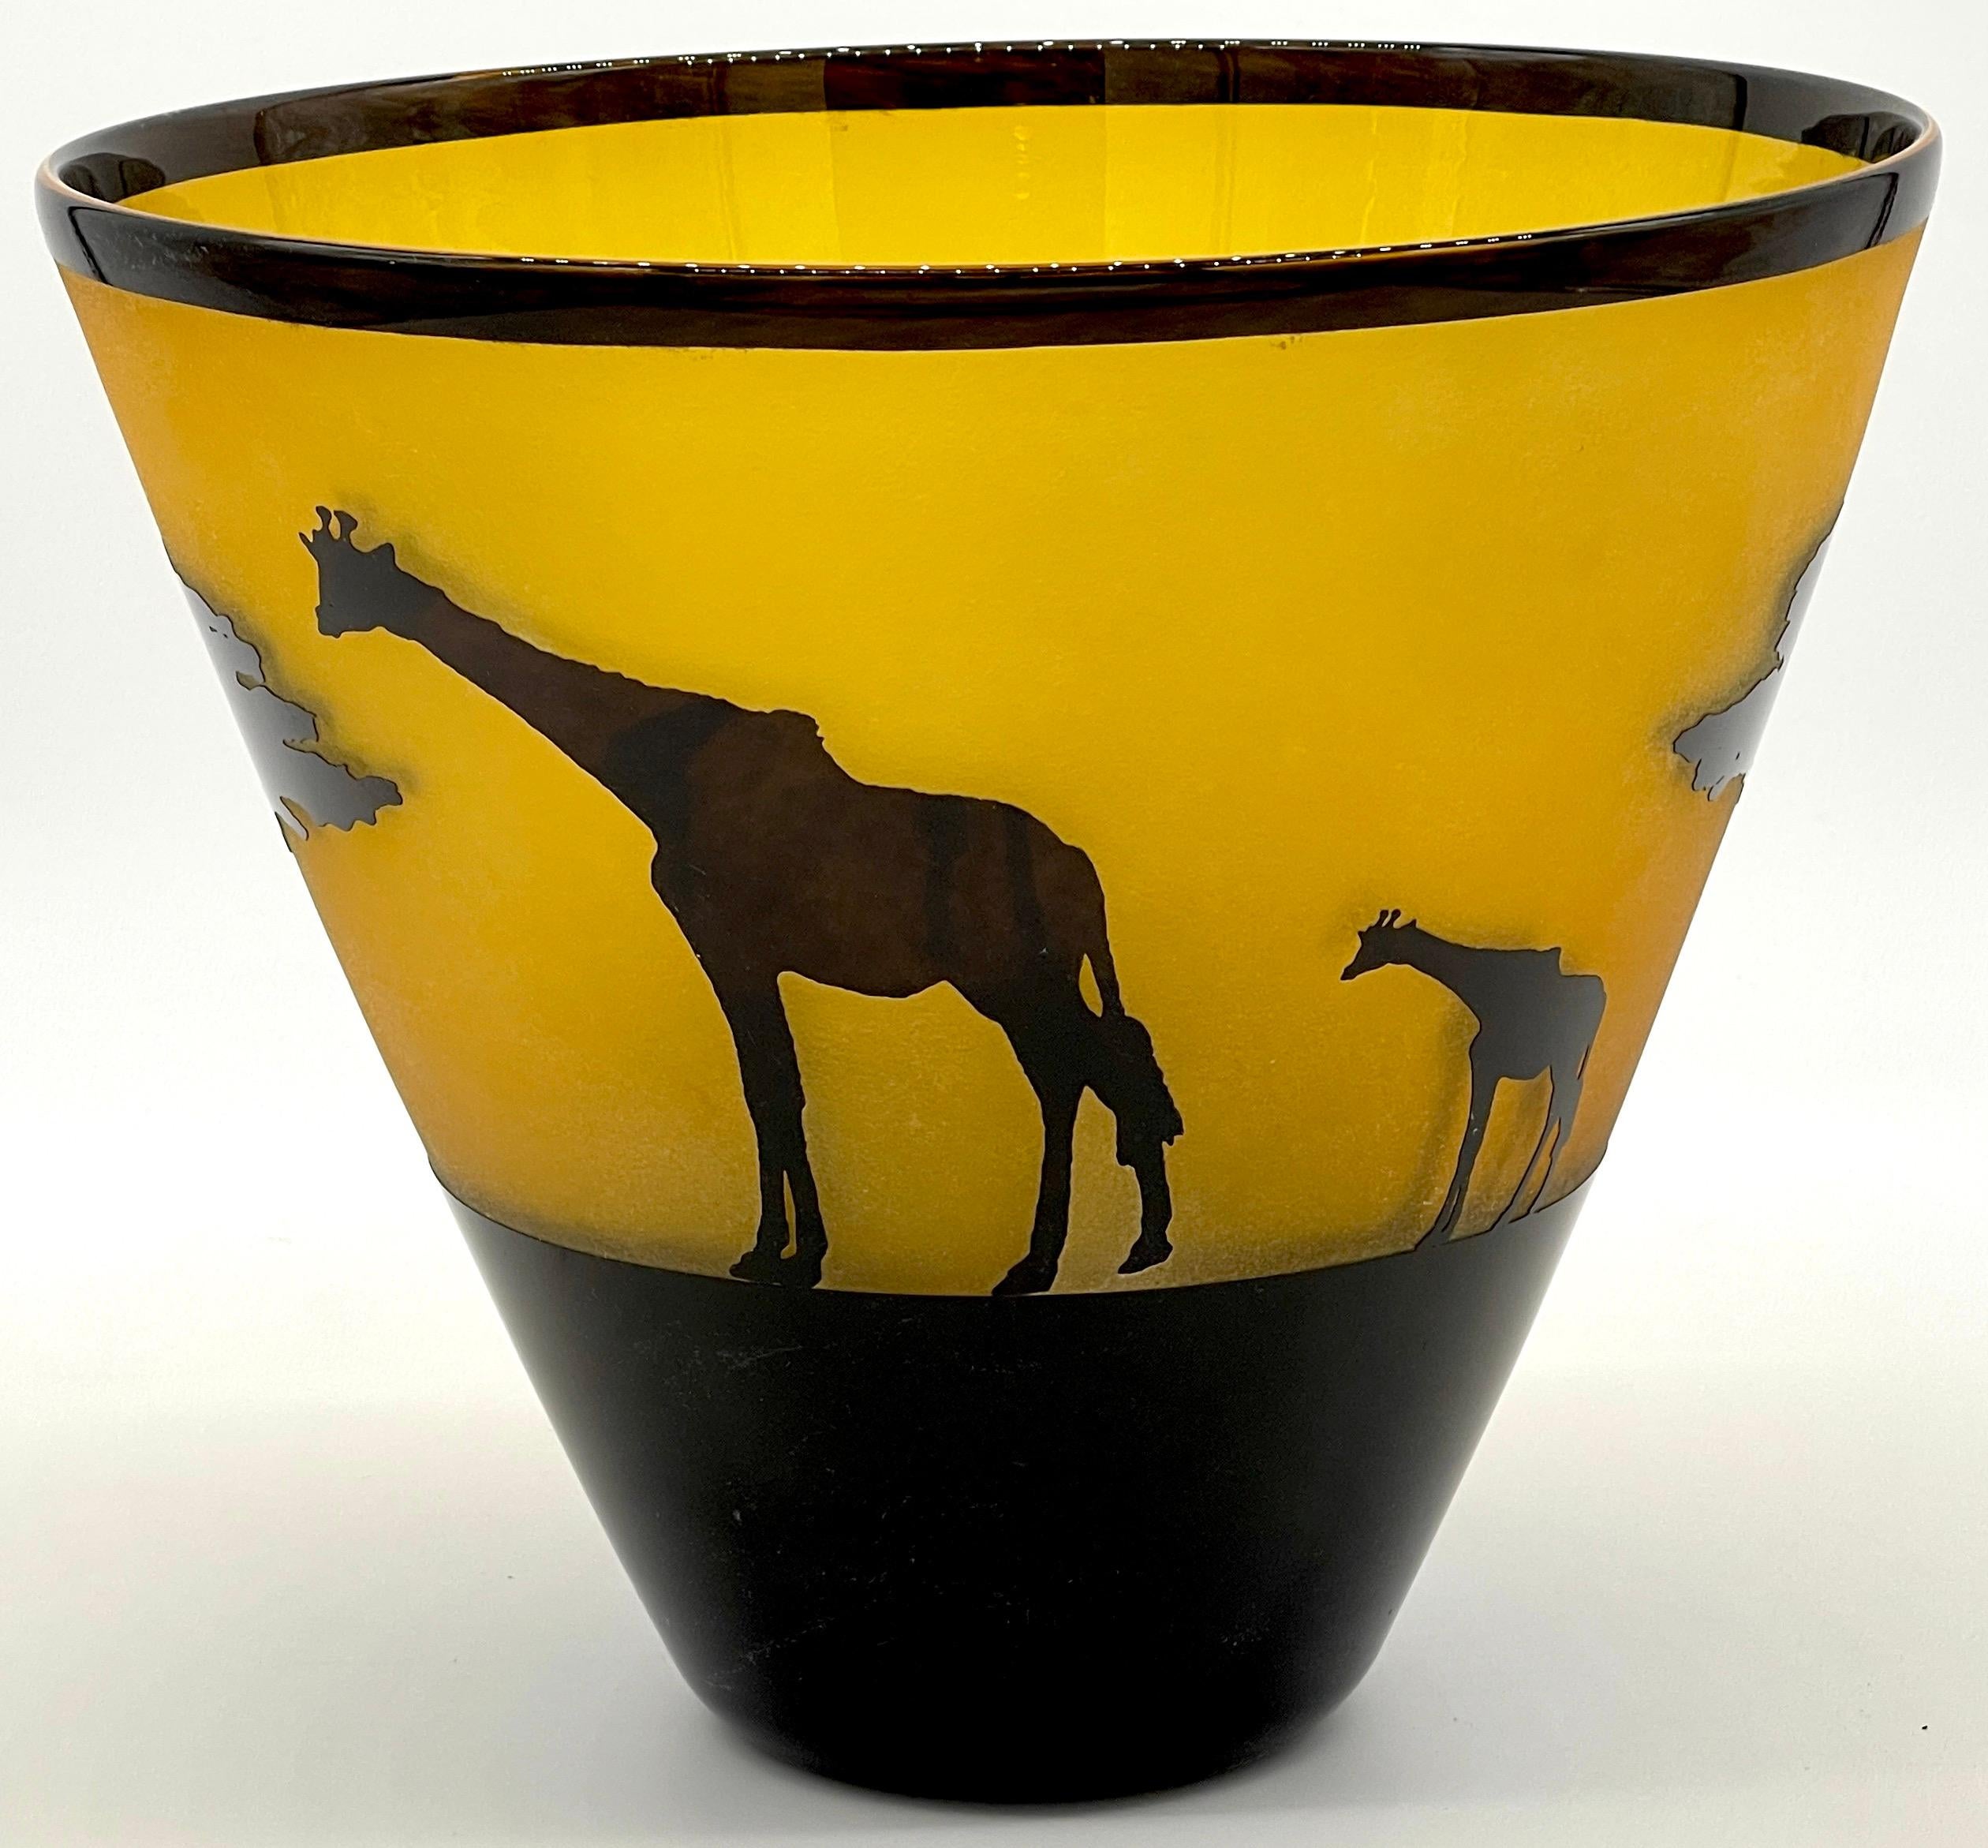 African Landscape Cameo Glass Vase by Steven Correia, 1986 Edition of #168/500 1